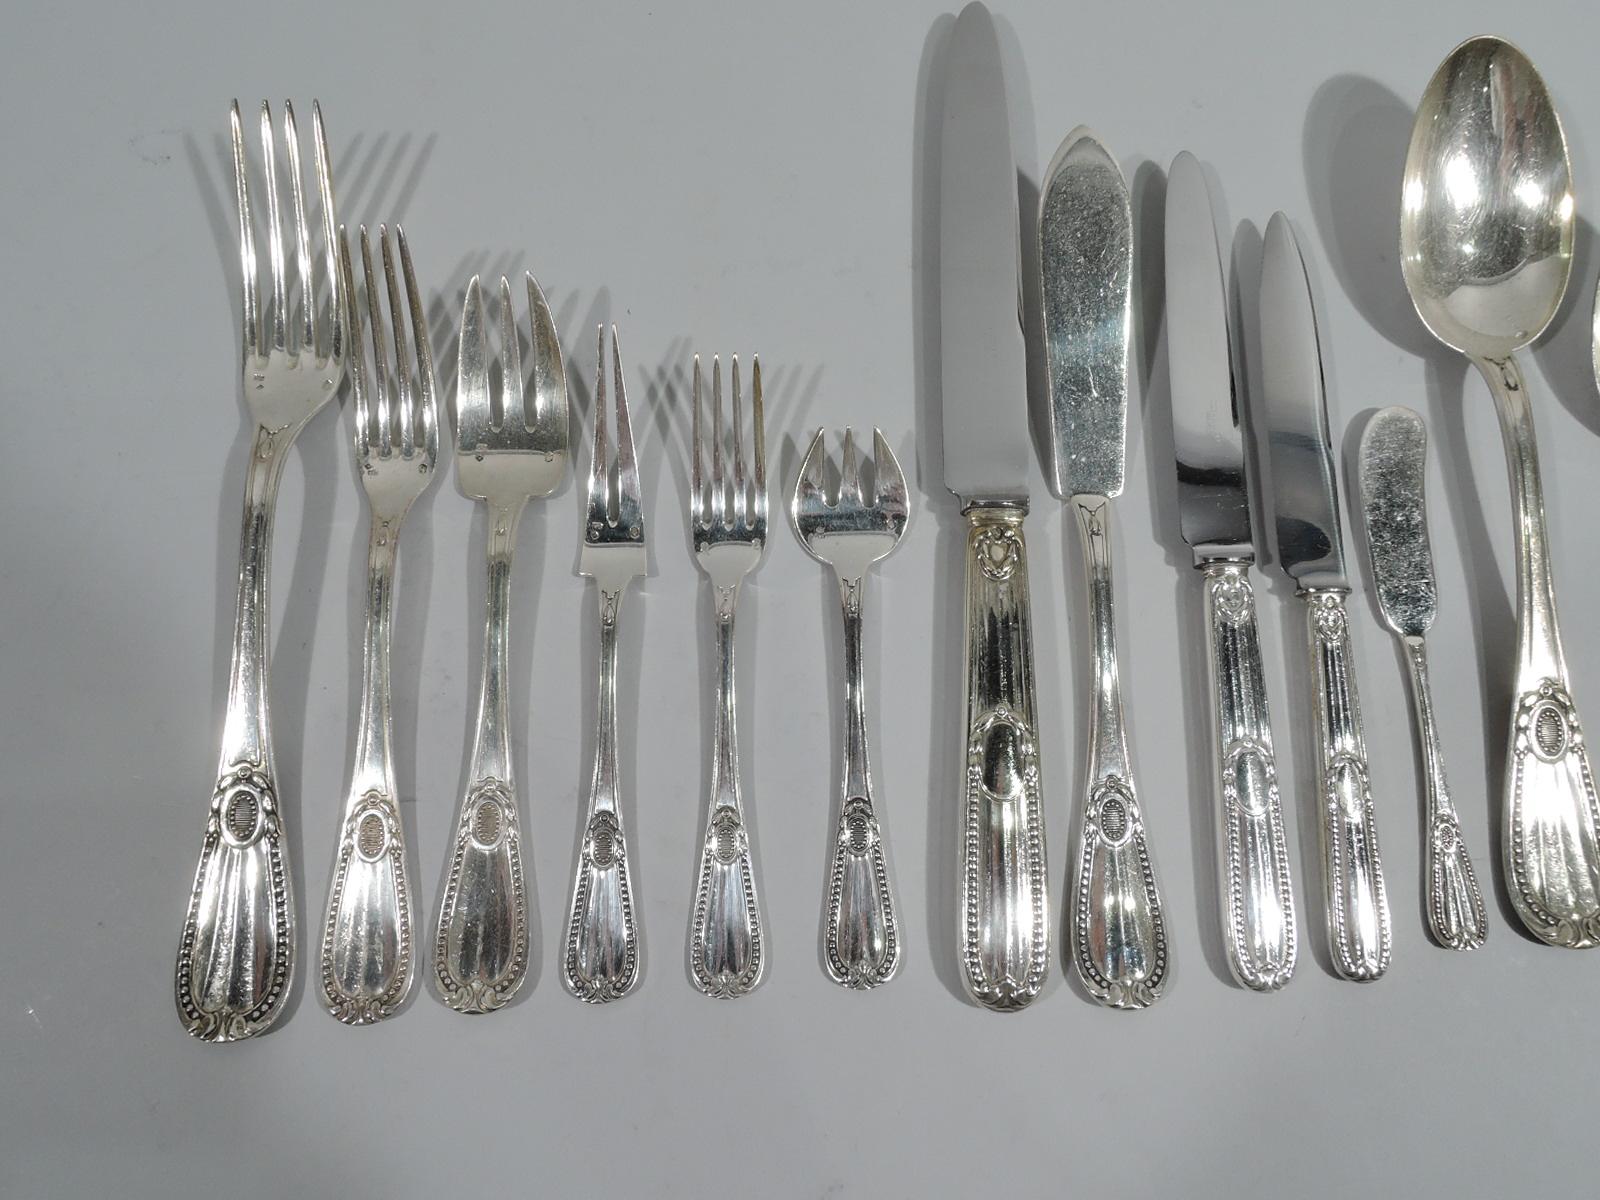 Empire Revival Tetard Perles French Dinner & Lunch Set for 24 with 474 Pieces